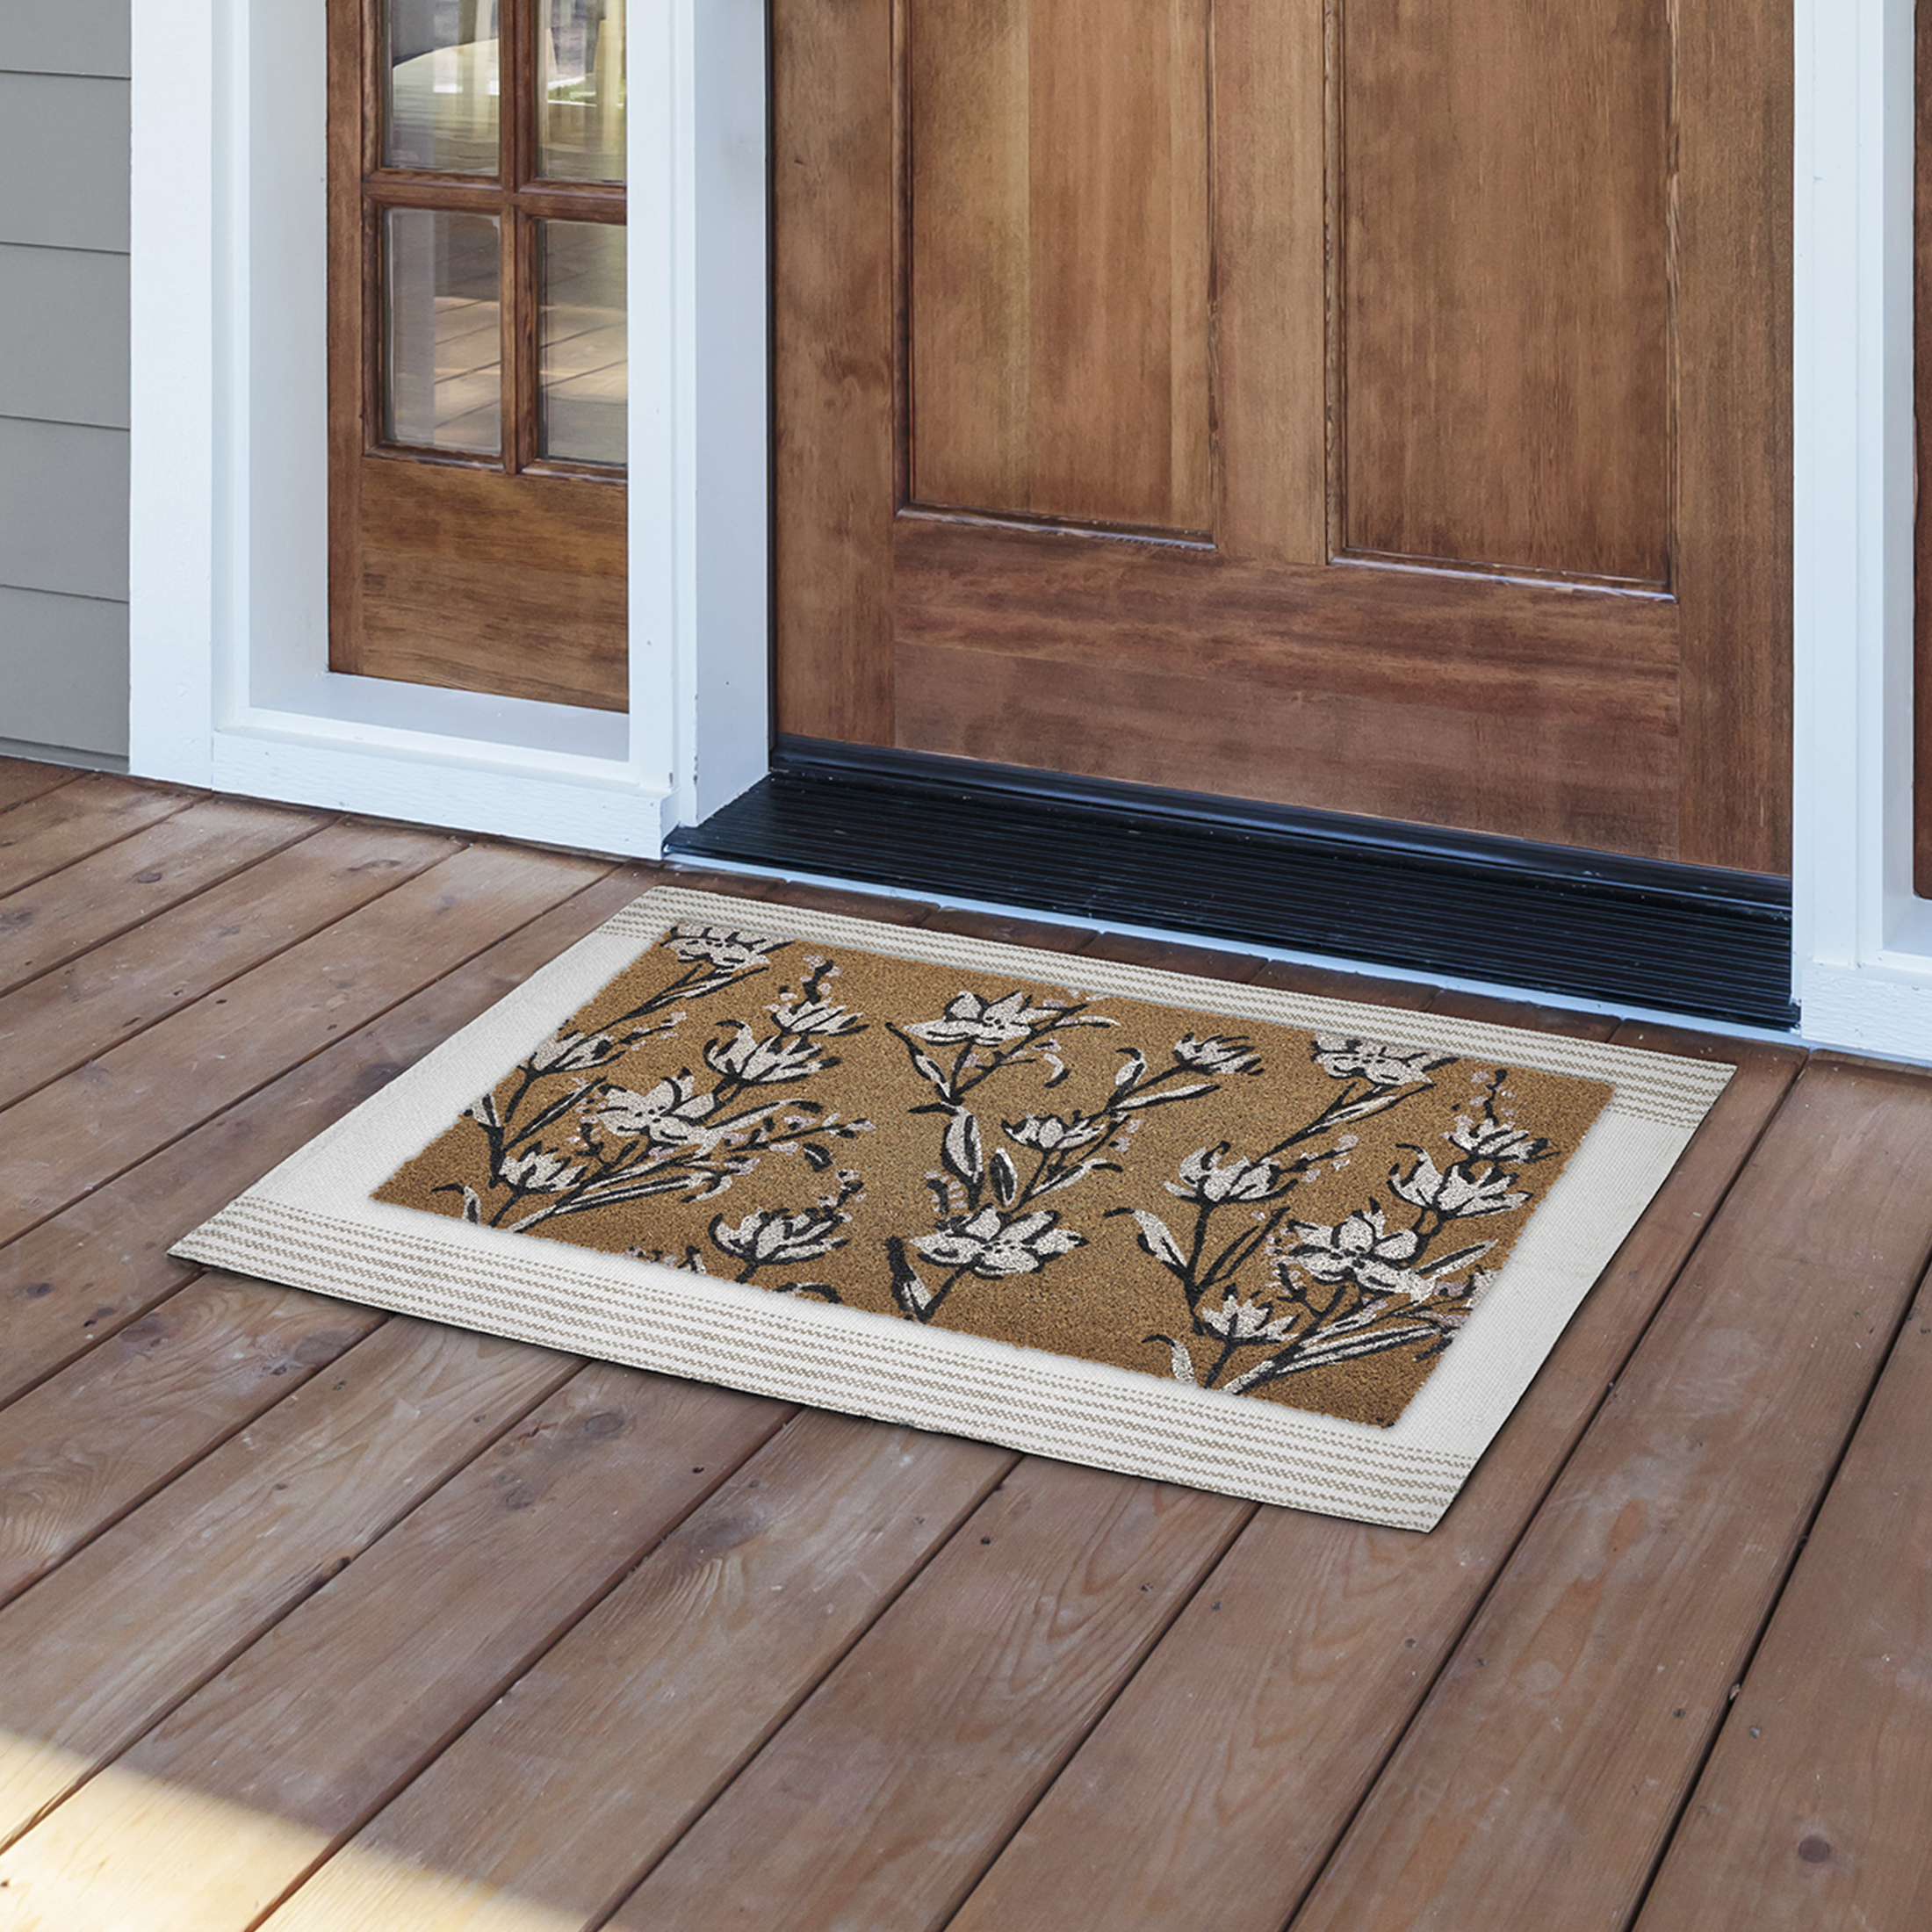 My Texas House Vertical Floral Natural/White Outdoor Coir Doormat, 18" x 30" - image 3 of 5